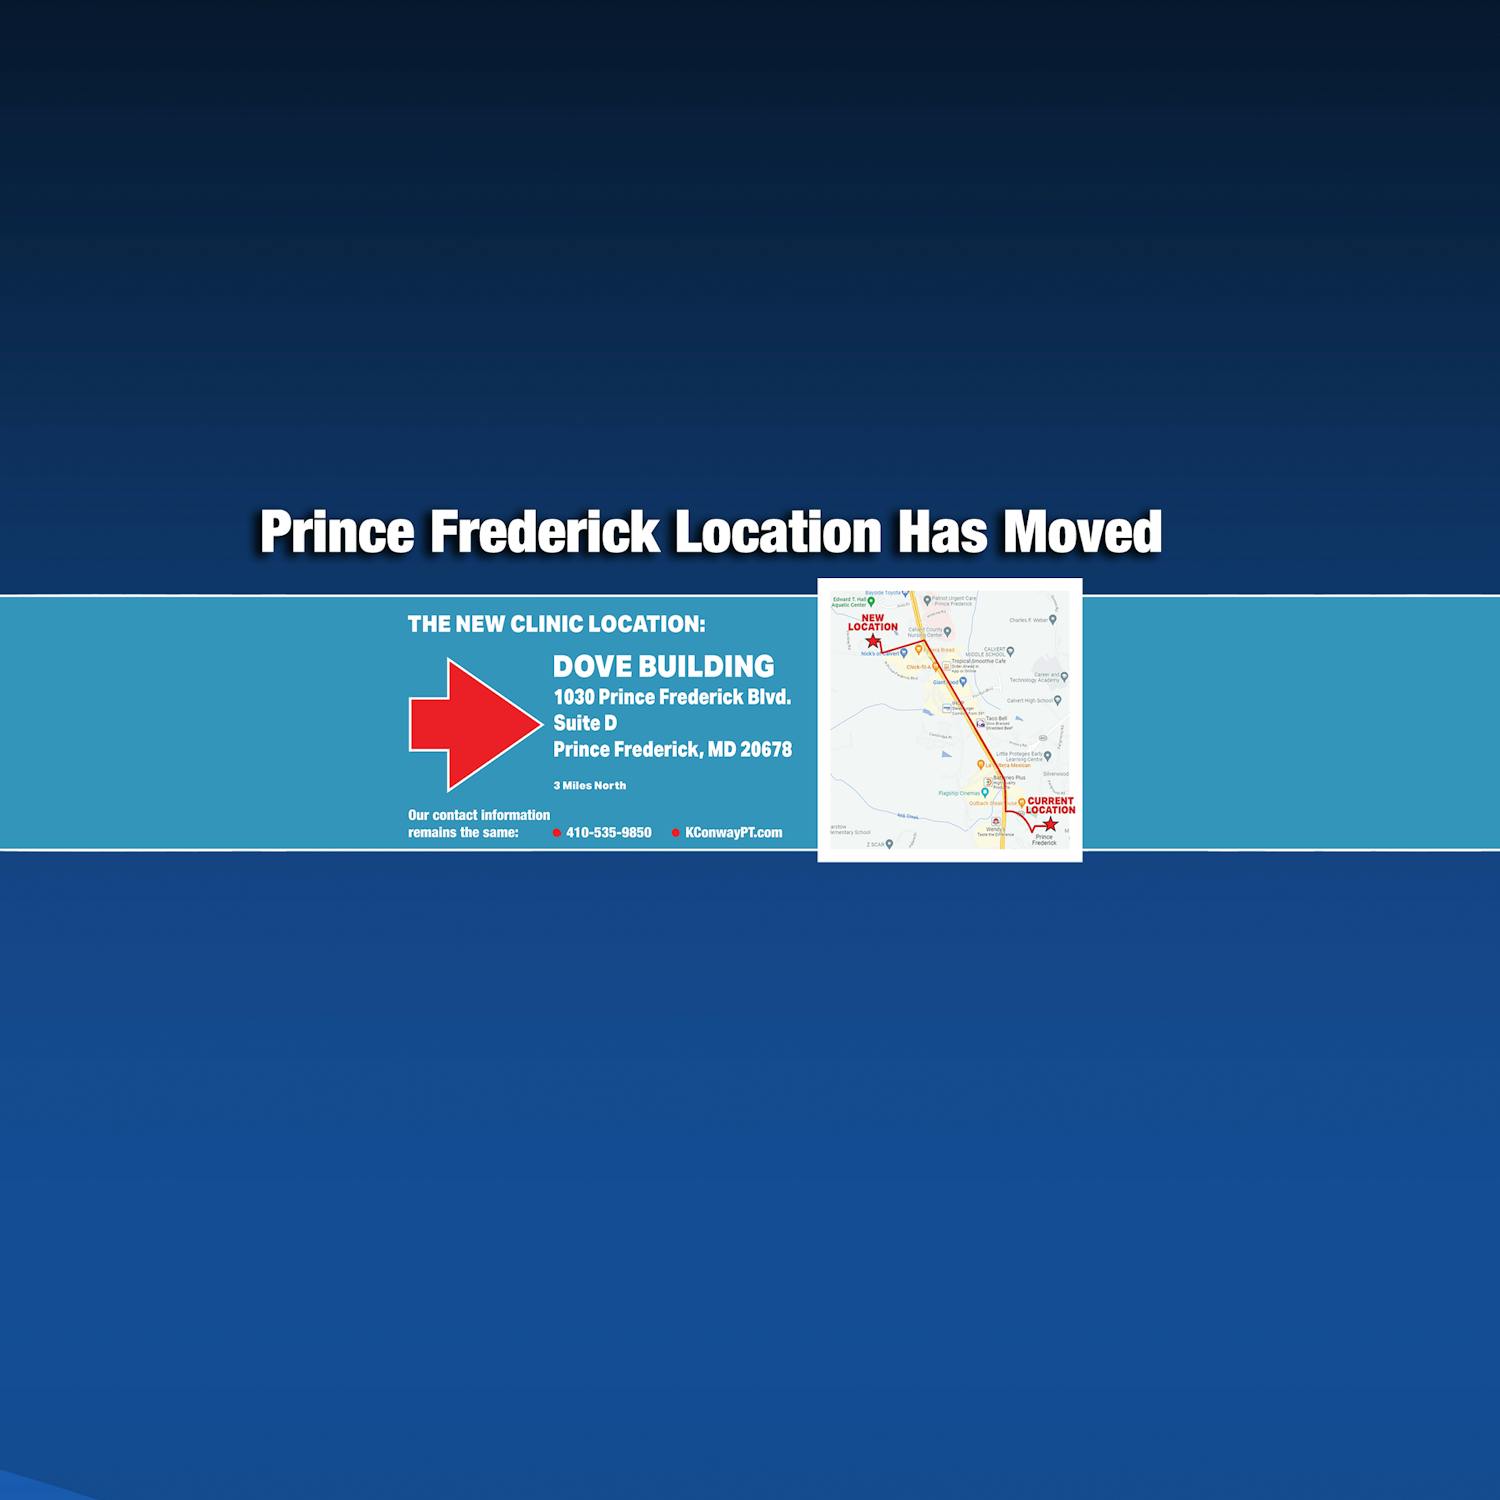 Prince Frederick MD has moved